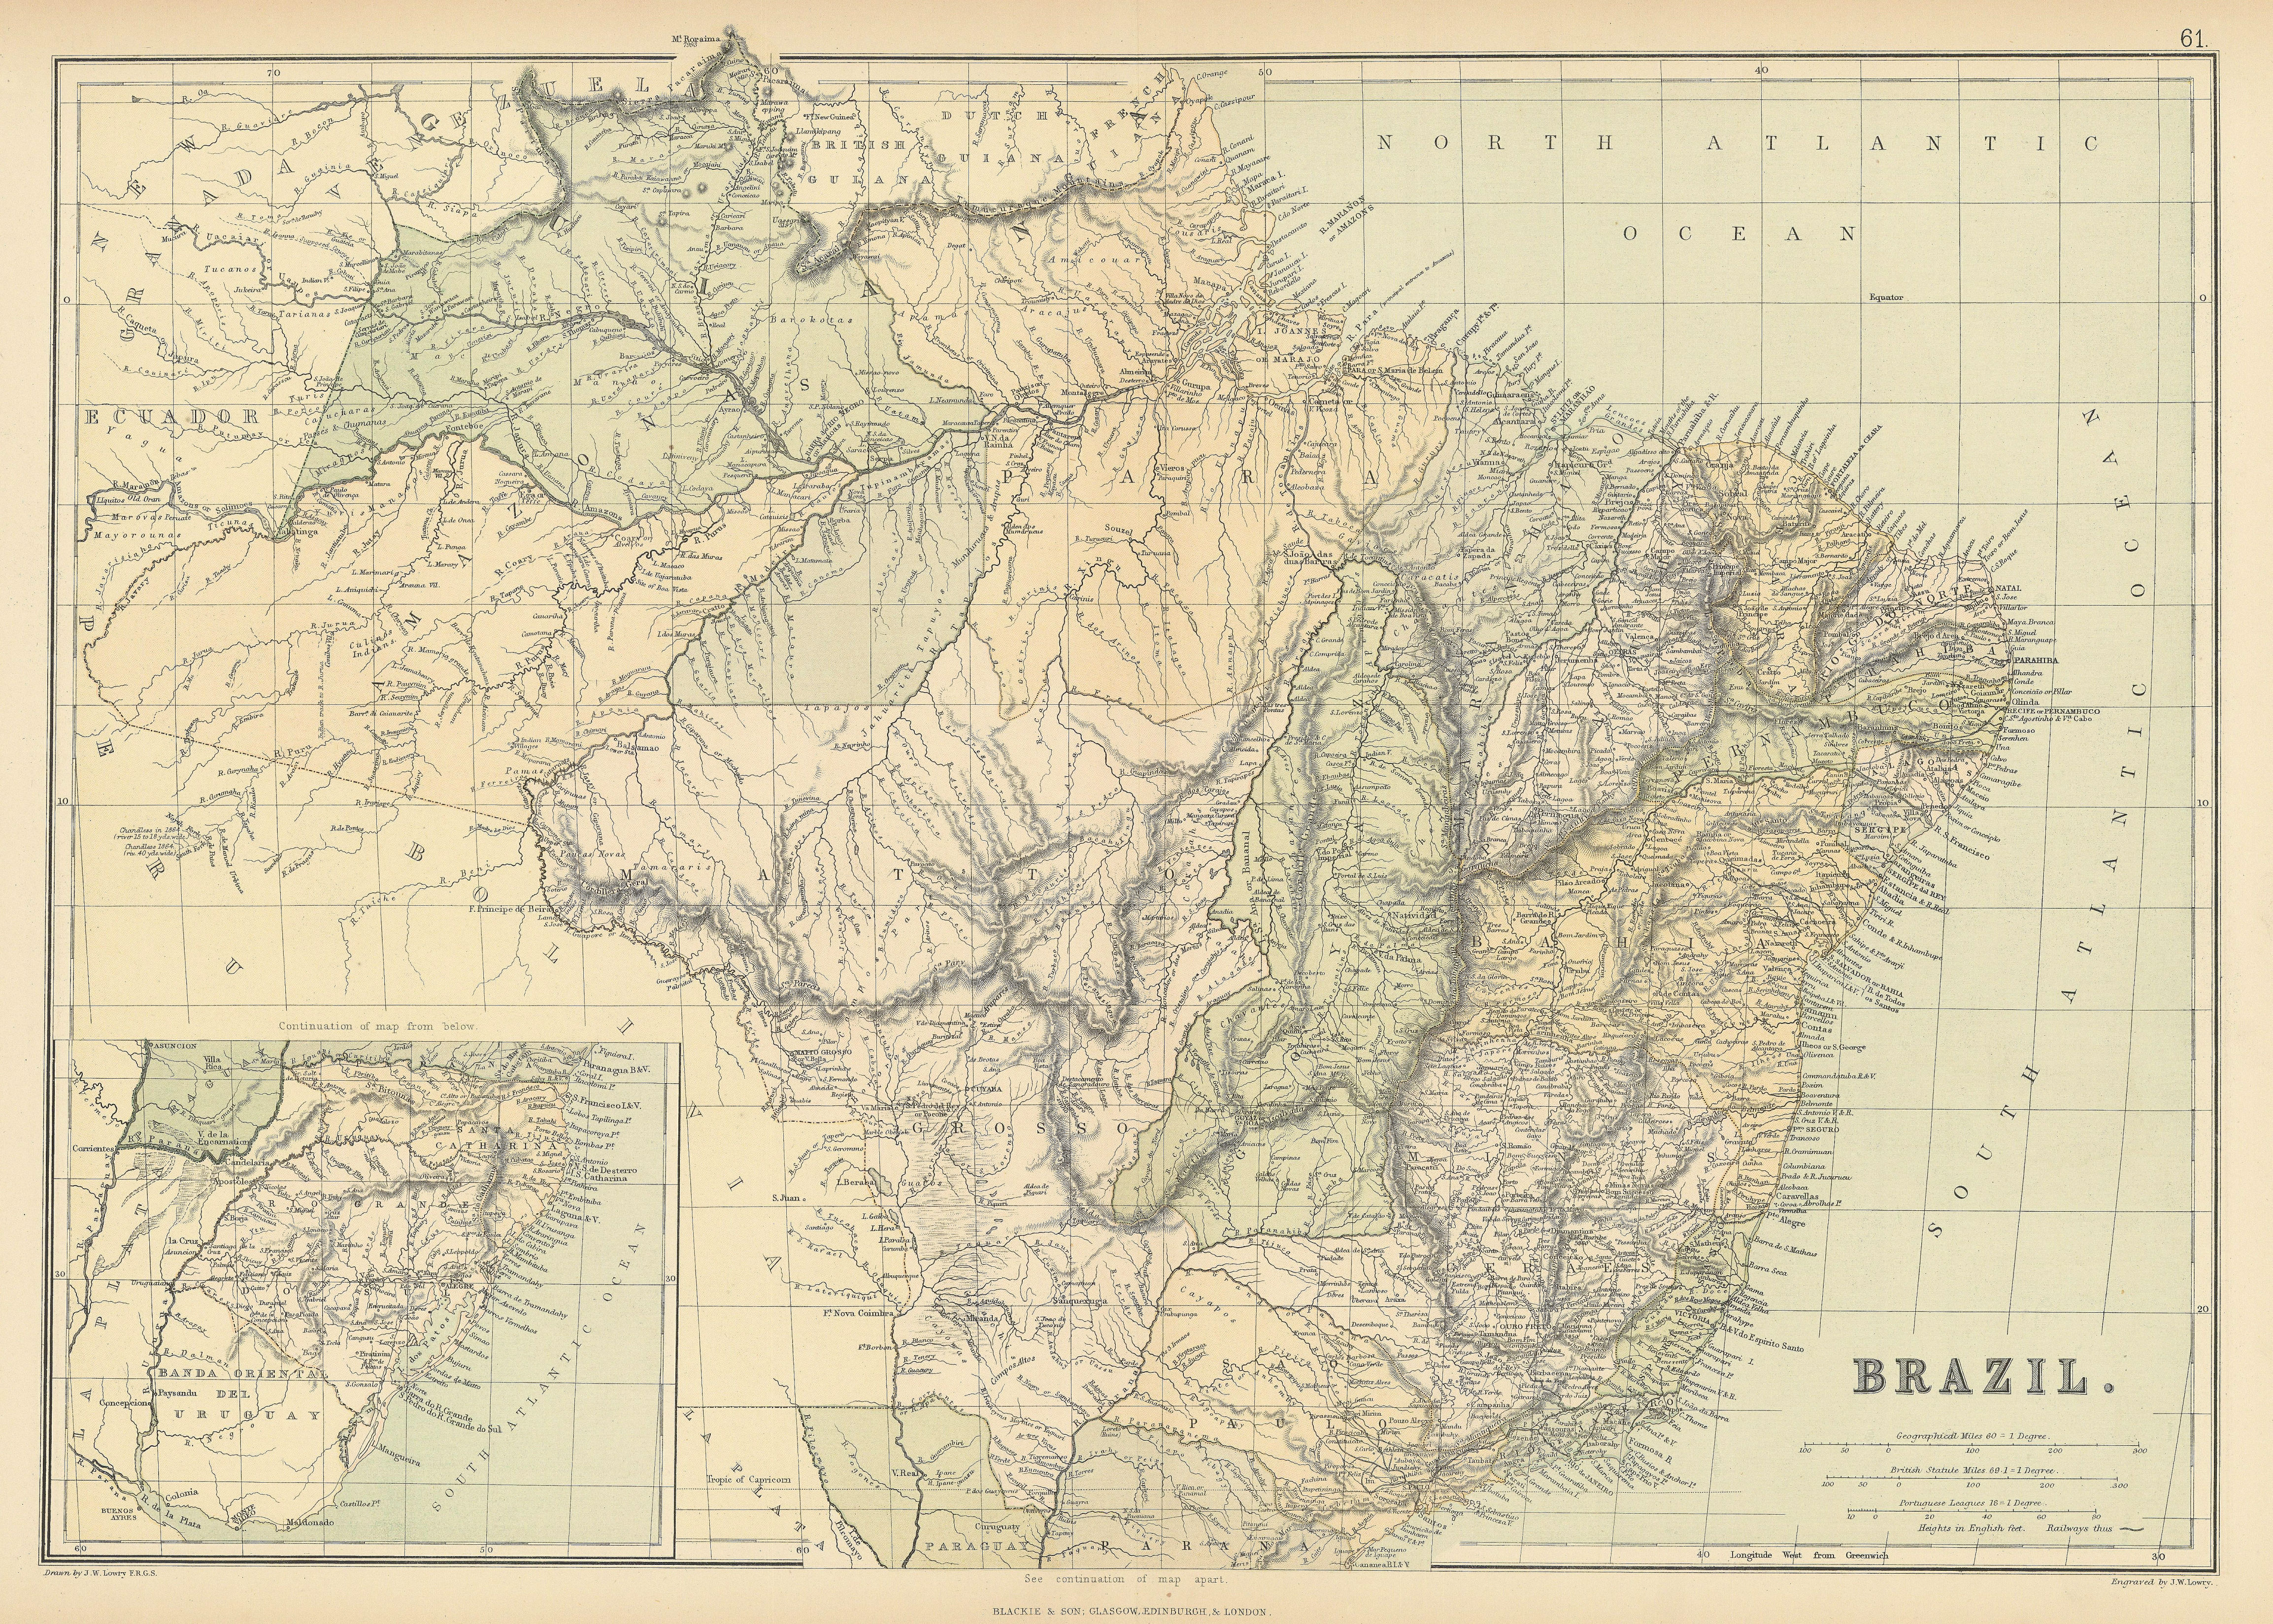 BRAZIL. showing states & railways. Scale in Portuguese Leagues. BLACKIE 1886 map